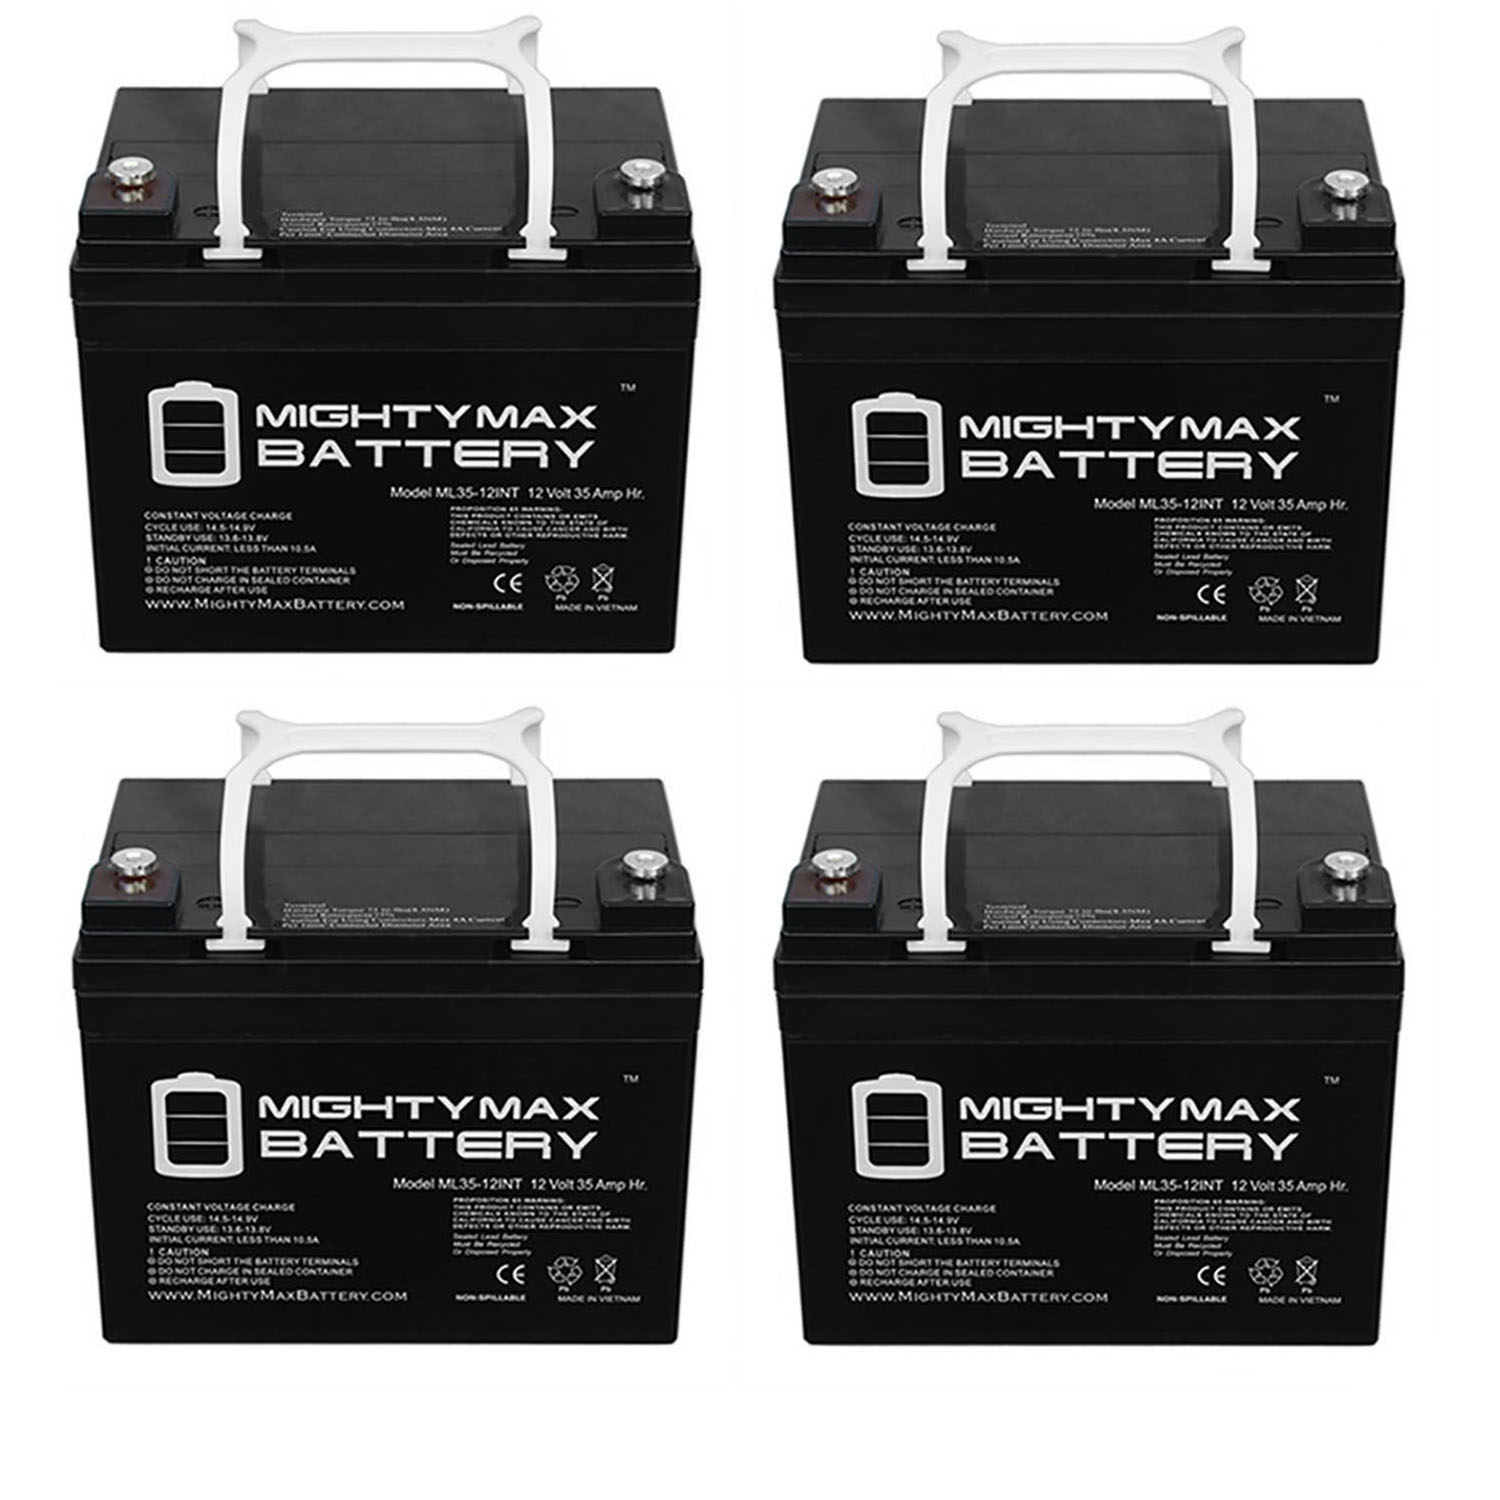 12V 35AH INT Replacement Battery for Ihc Cub Garden 1250 - 4 Pack